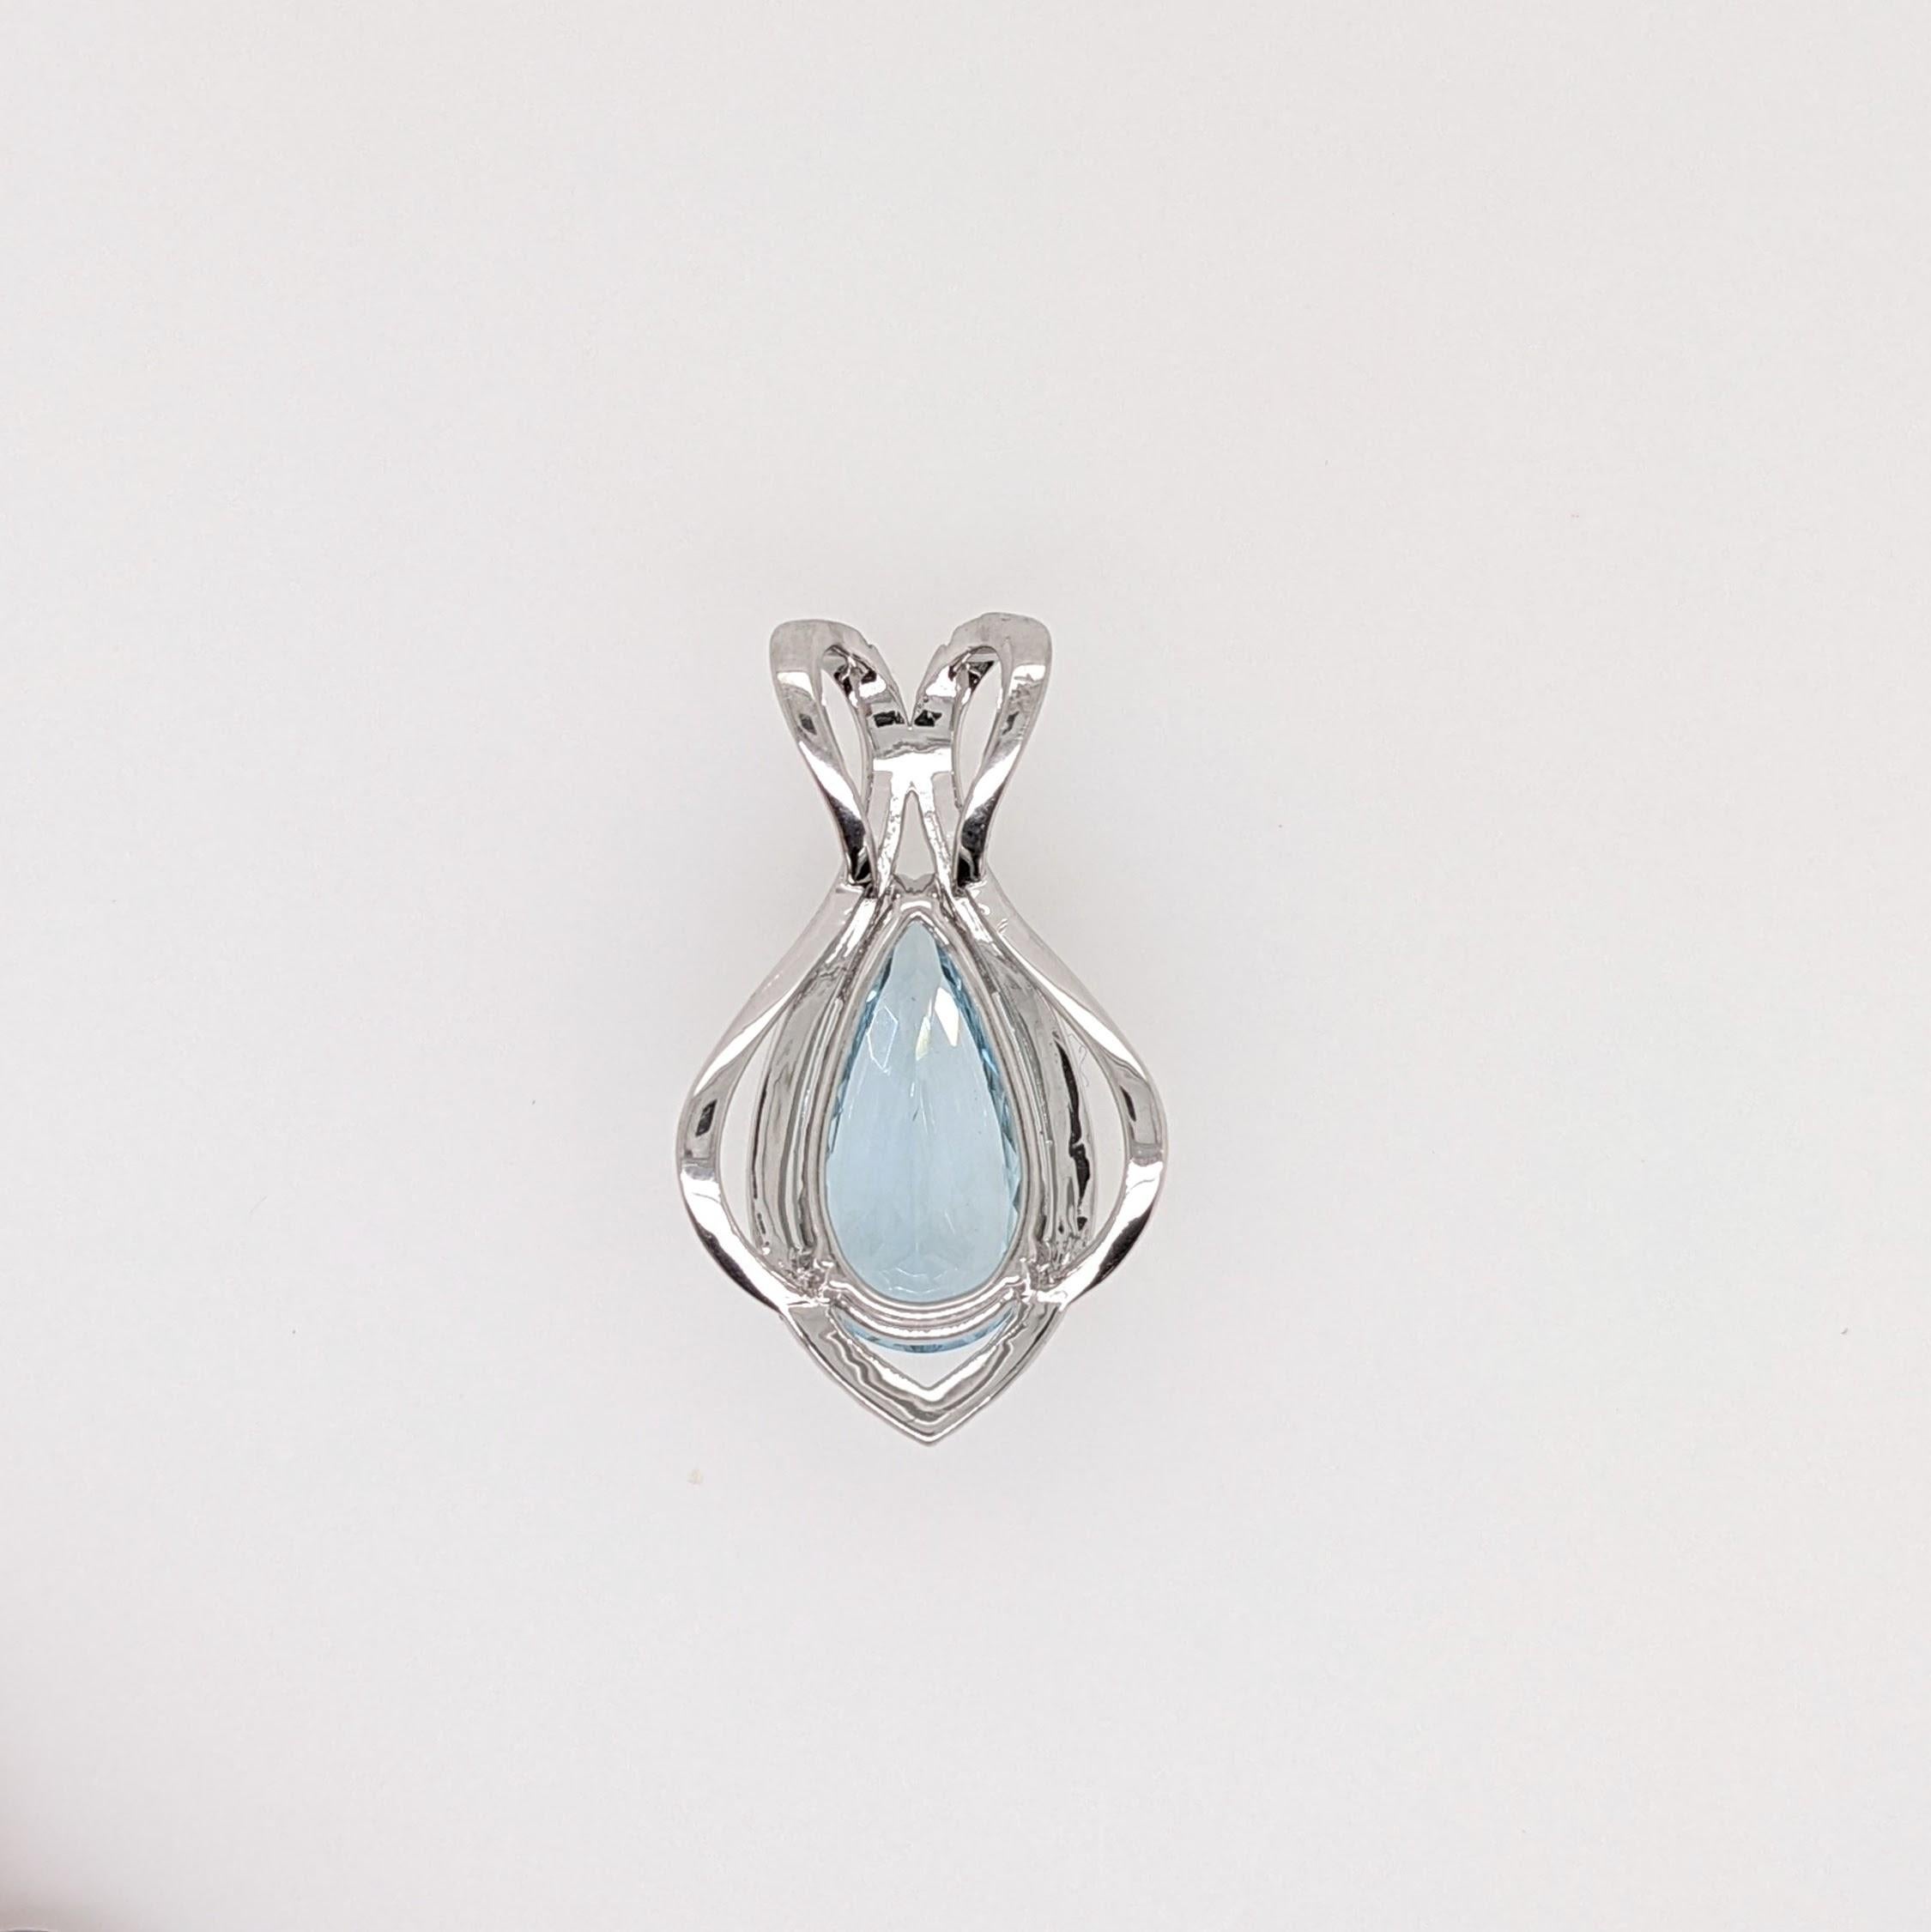 Specifications

Item Type: Pendant
Center Stone: Aquamarine
Treatment: Heated
Weight: 4.11 ct
Head size: 16x8.5mm
Shape: Pear
Hardness: 7.5-8
Origin: Brazil

Metal: 14k/2.94g
Diamonds SI/GH: 41/0.42 cttw

Sku: AJP020/3787

This pendant is made with